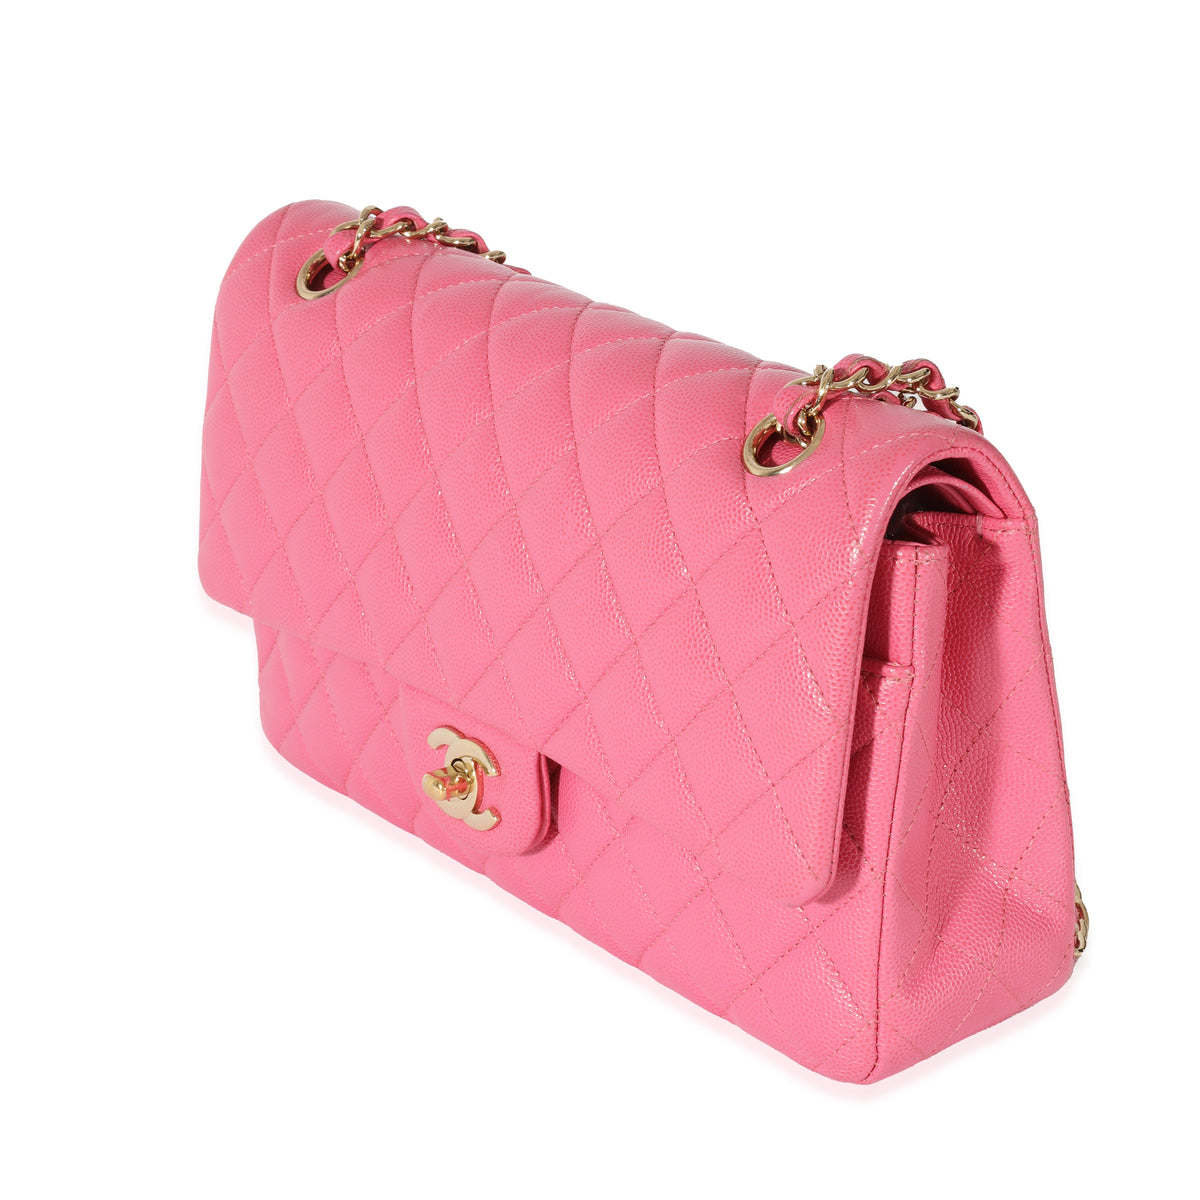 Chanel Pink Quilted Caviar Medium Classic Double Flap Bag, myGemma